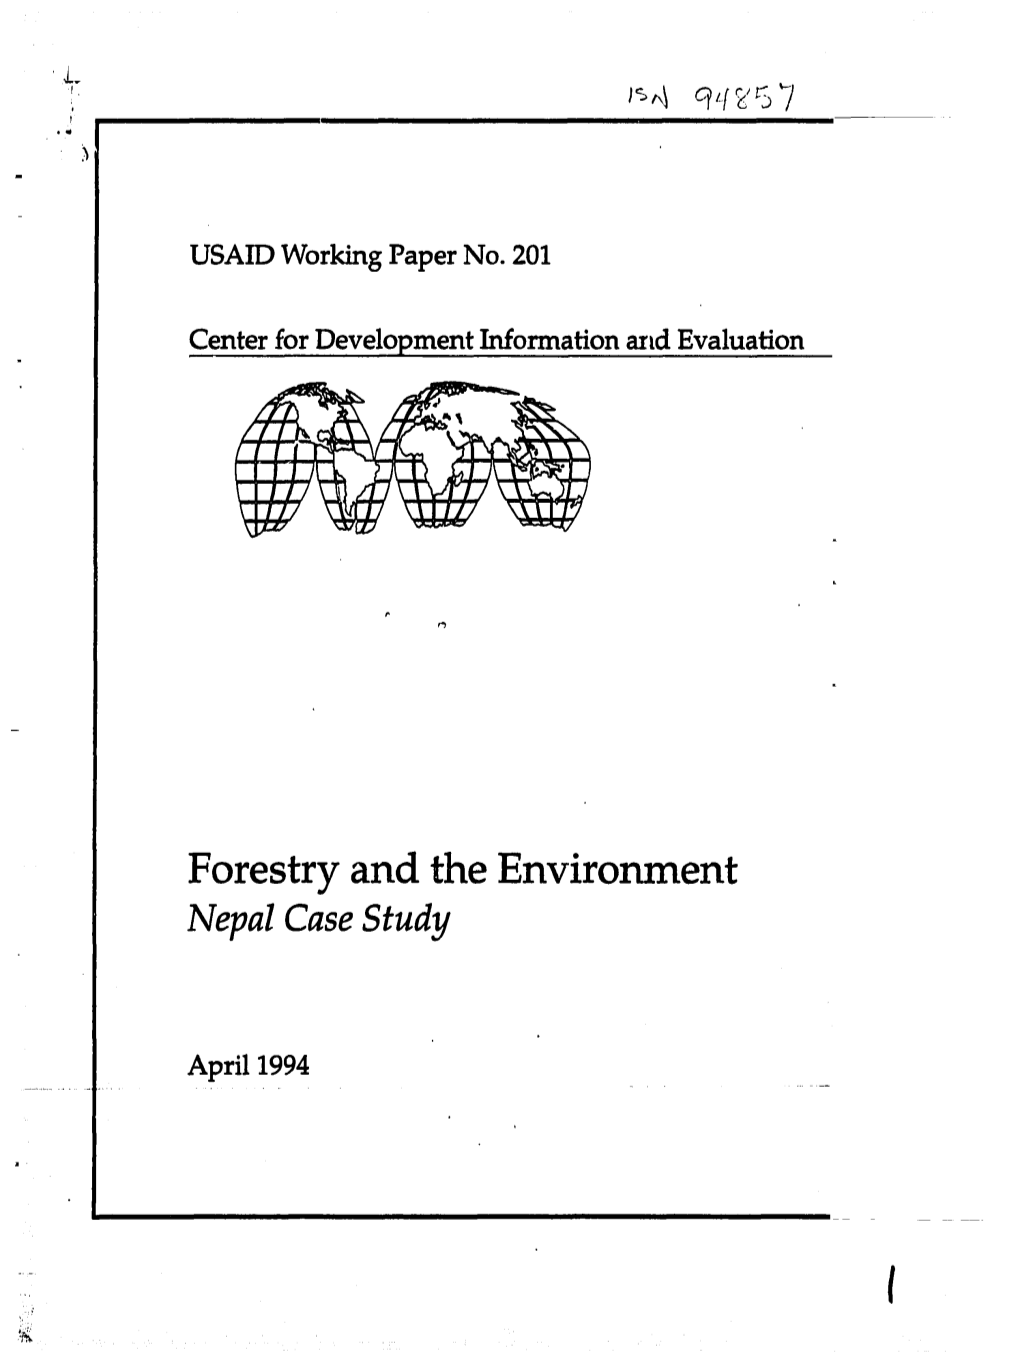 Forestry and the Environment Nepal Case Study